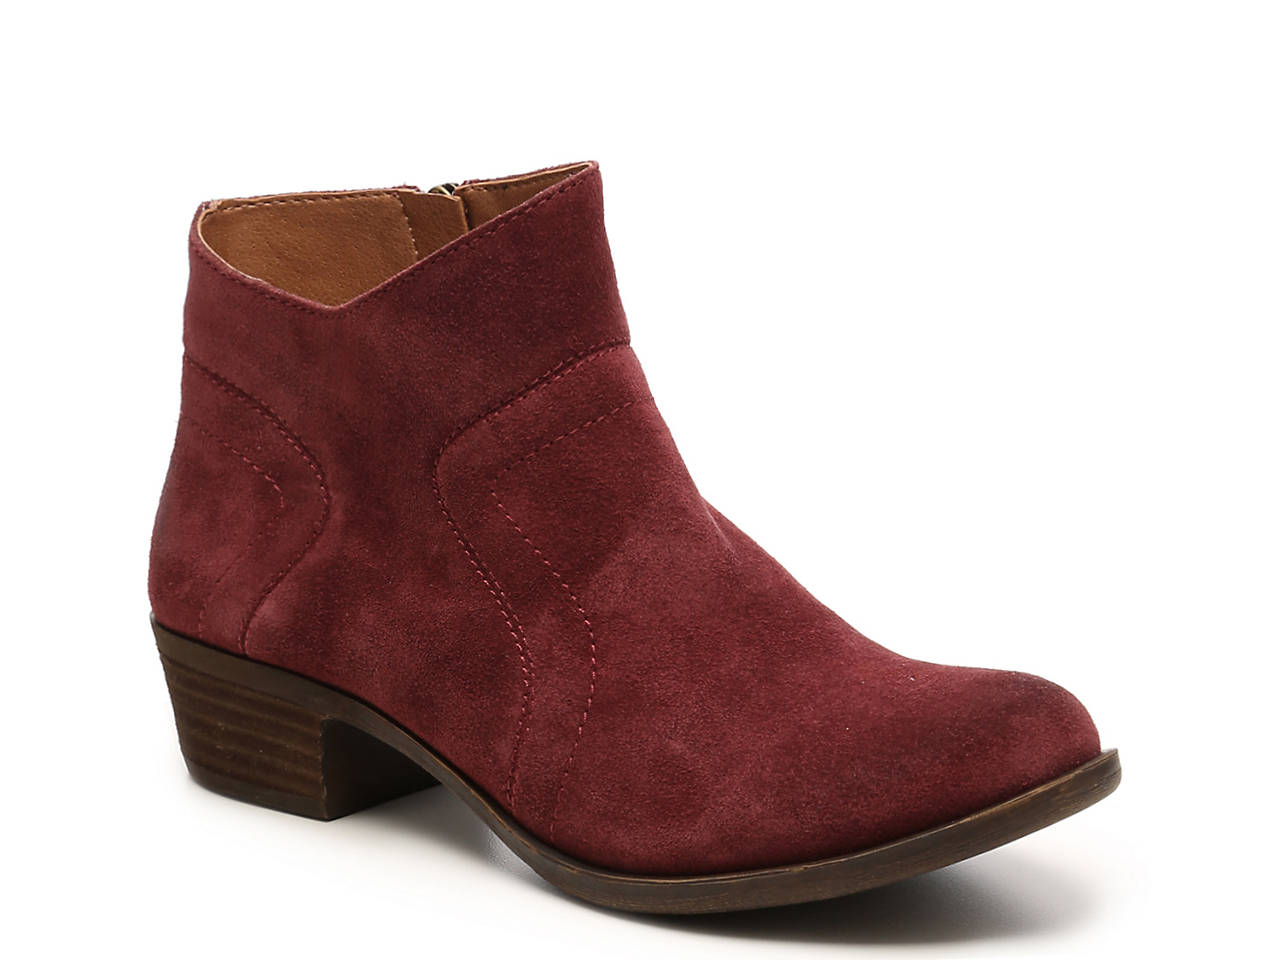 Image result for lucky brand brolley bootie